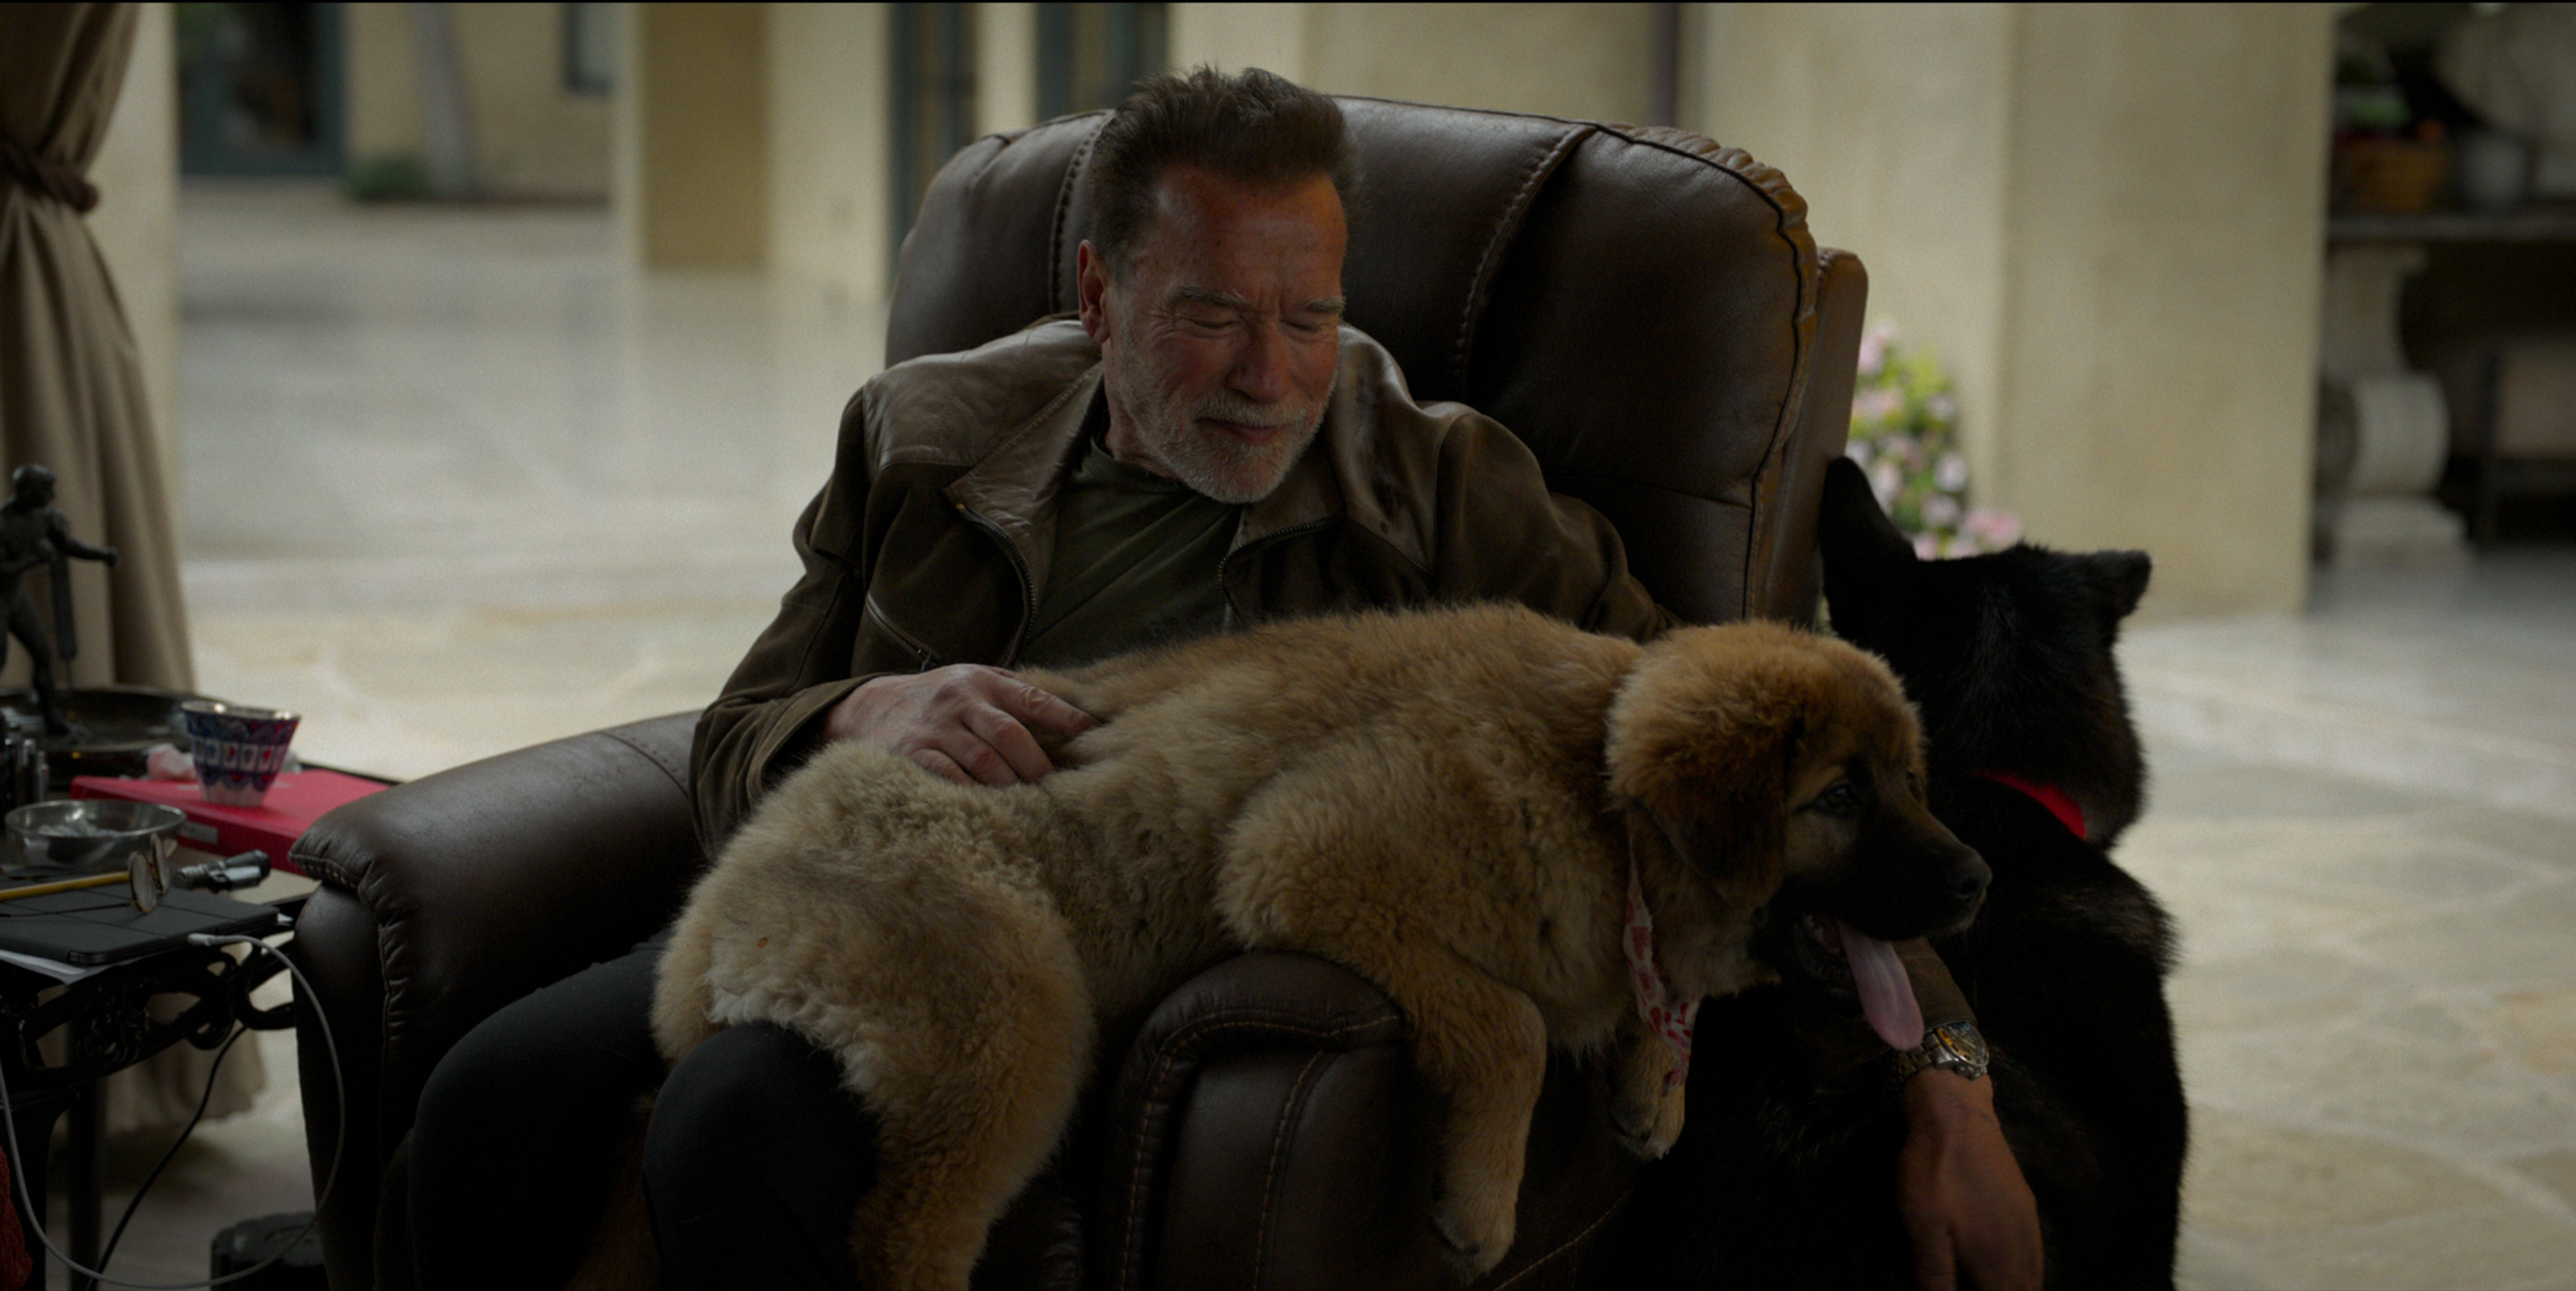 Arnold Schwarzenegger in his his home in Los Angeles with his dog. Image: Netflix / Supplied